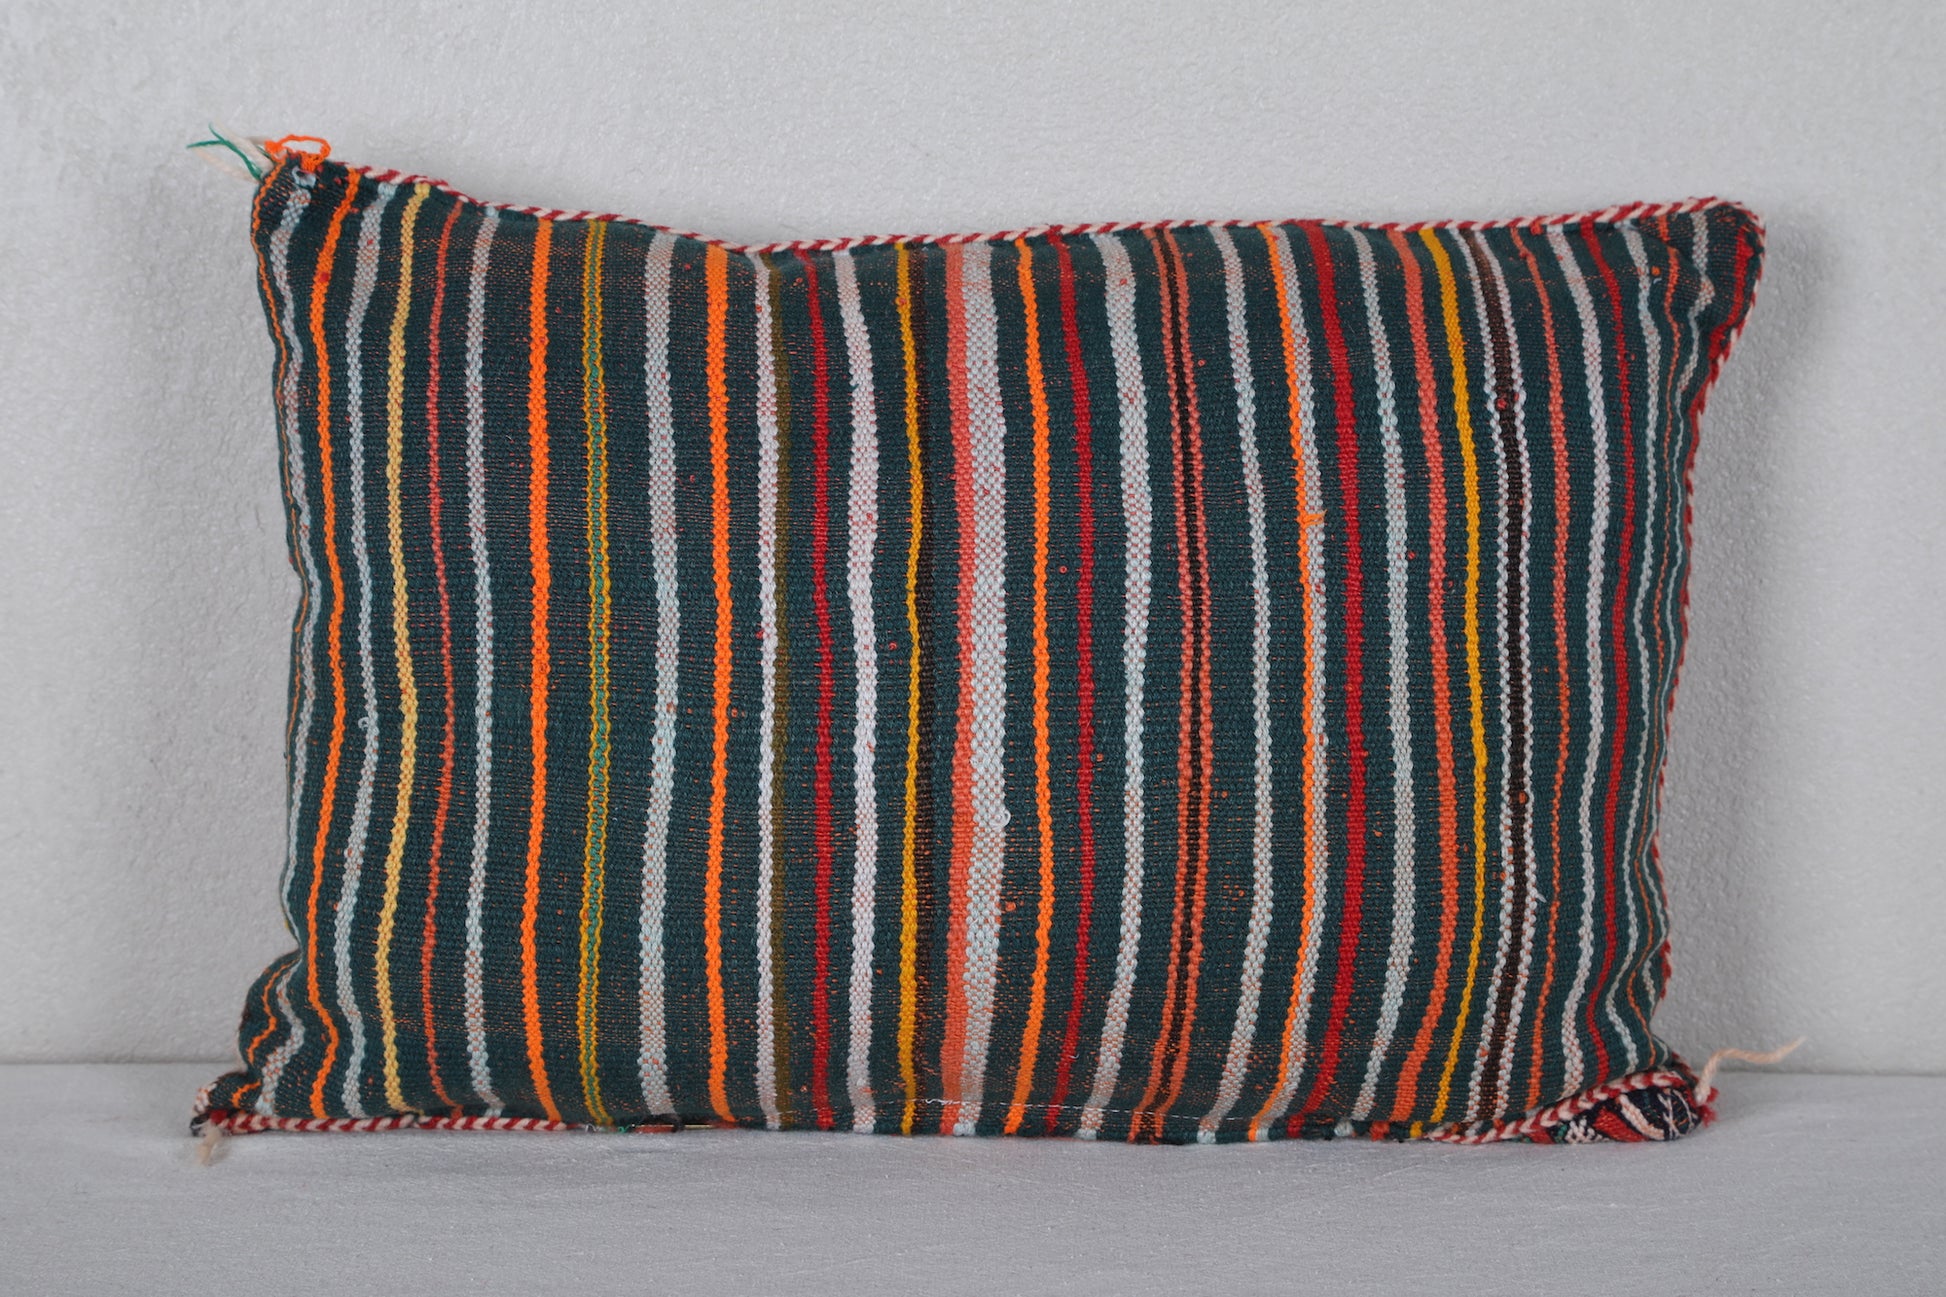 Vintage Moroccan Kilim Pillow 12.5 INCHES X 17.7 INCHES